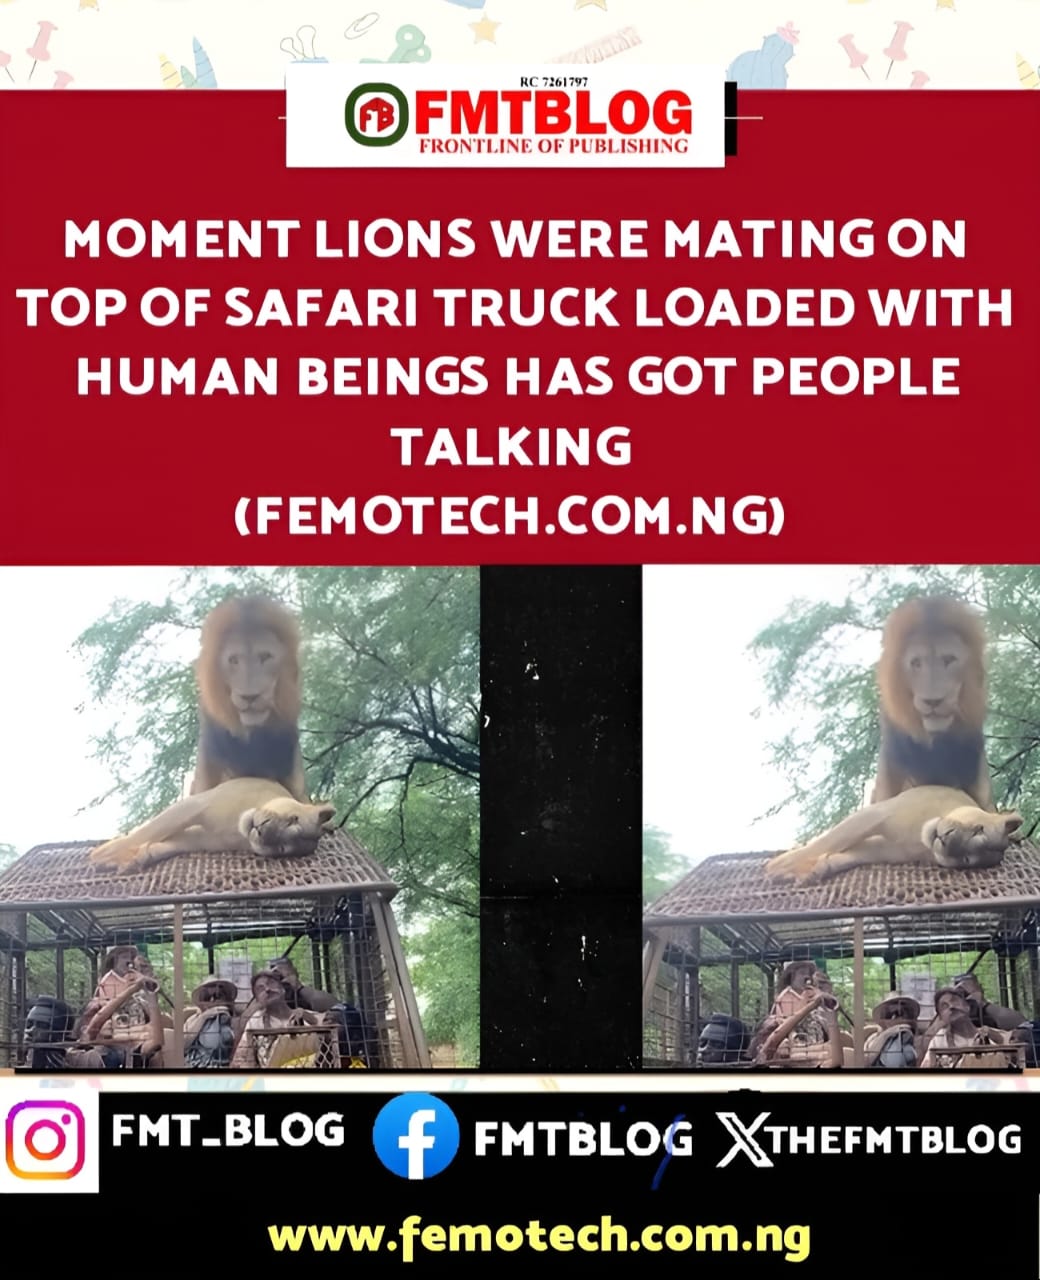 Moment Lions Were Mating On Top Of Safari Truck Loaded With Human Beings Has Got People Talking